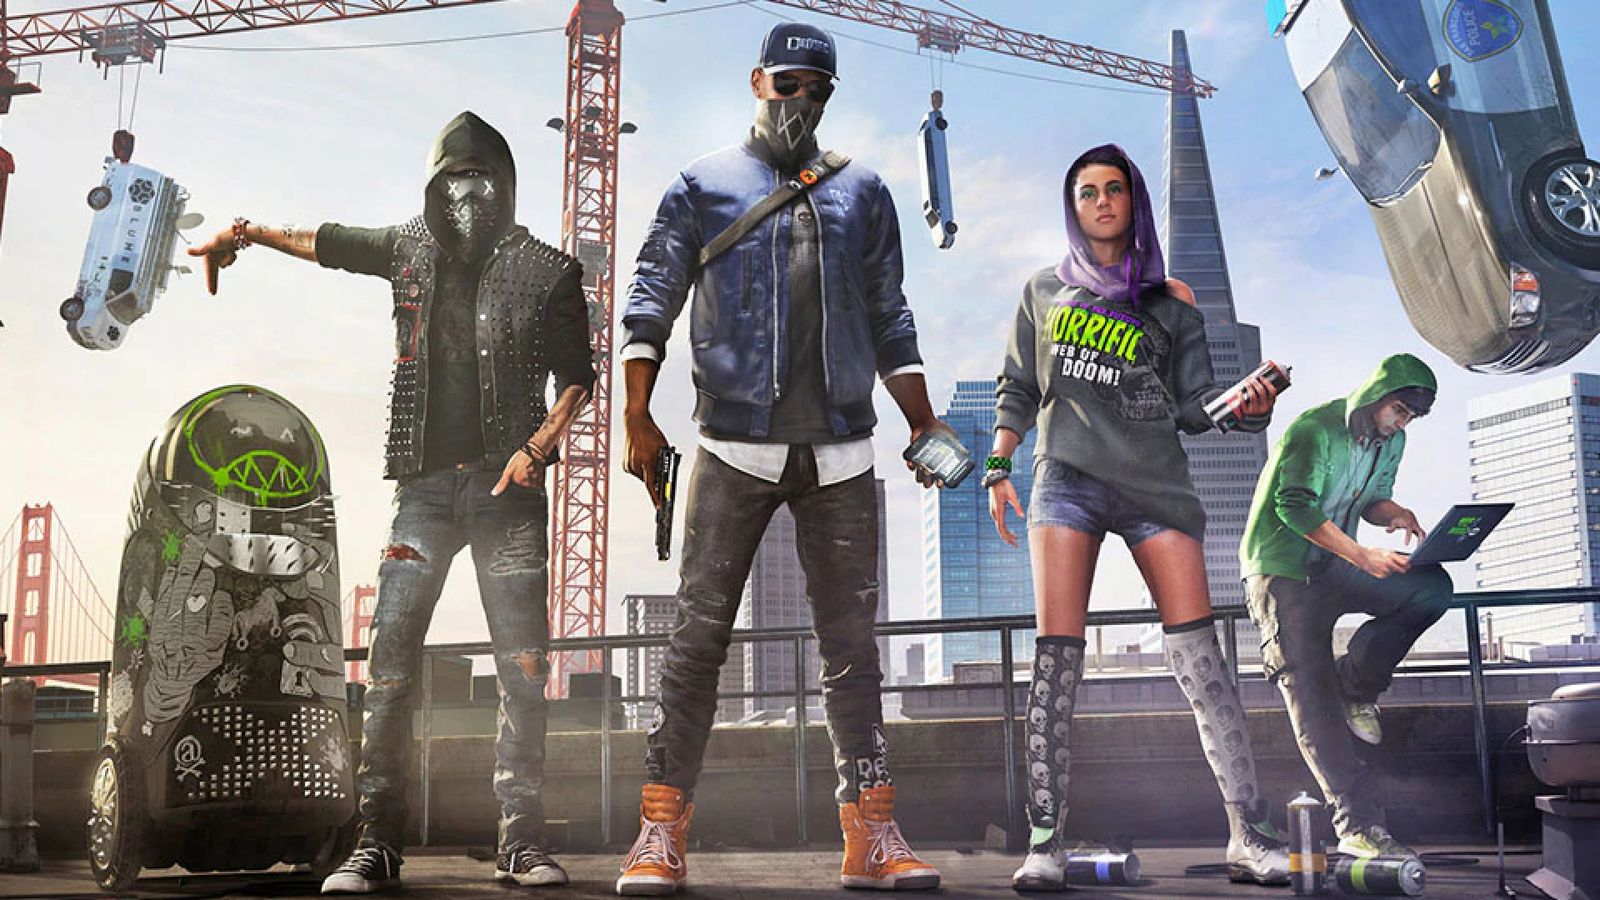 Watch Dogs 2 image of three characters, two with their faces covered, holding weapons with cars hanging from cranes in the background.